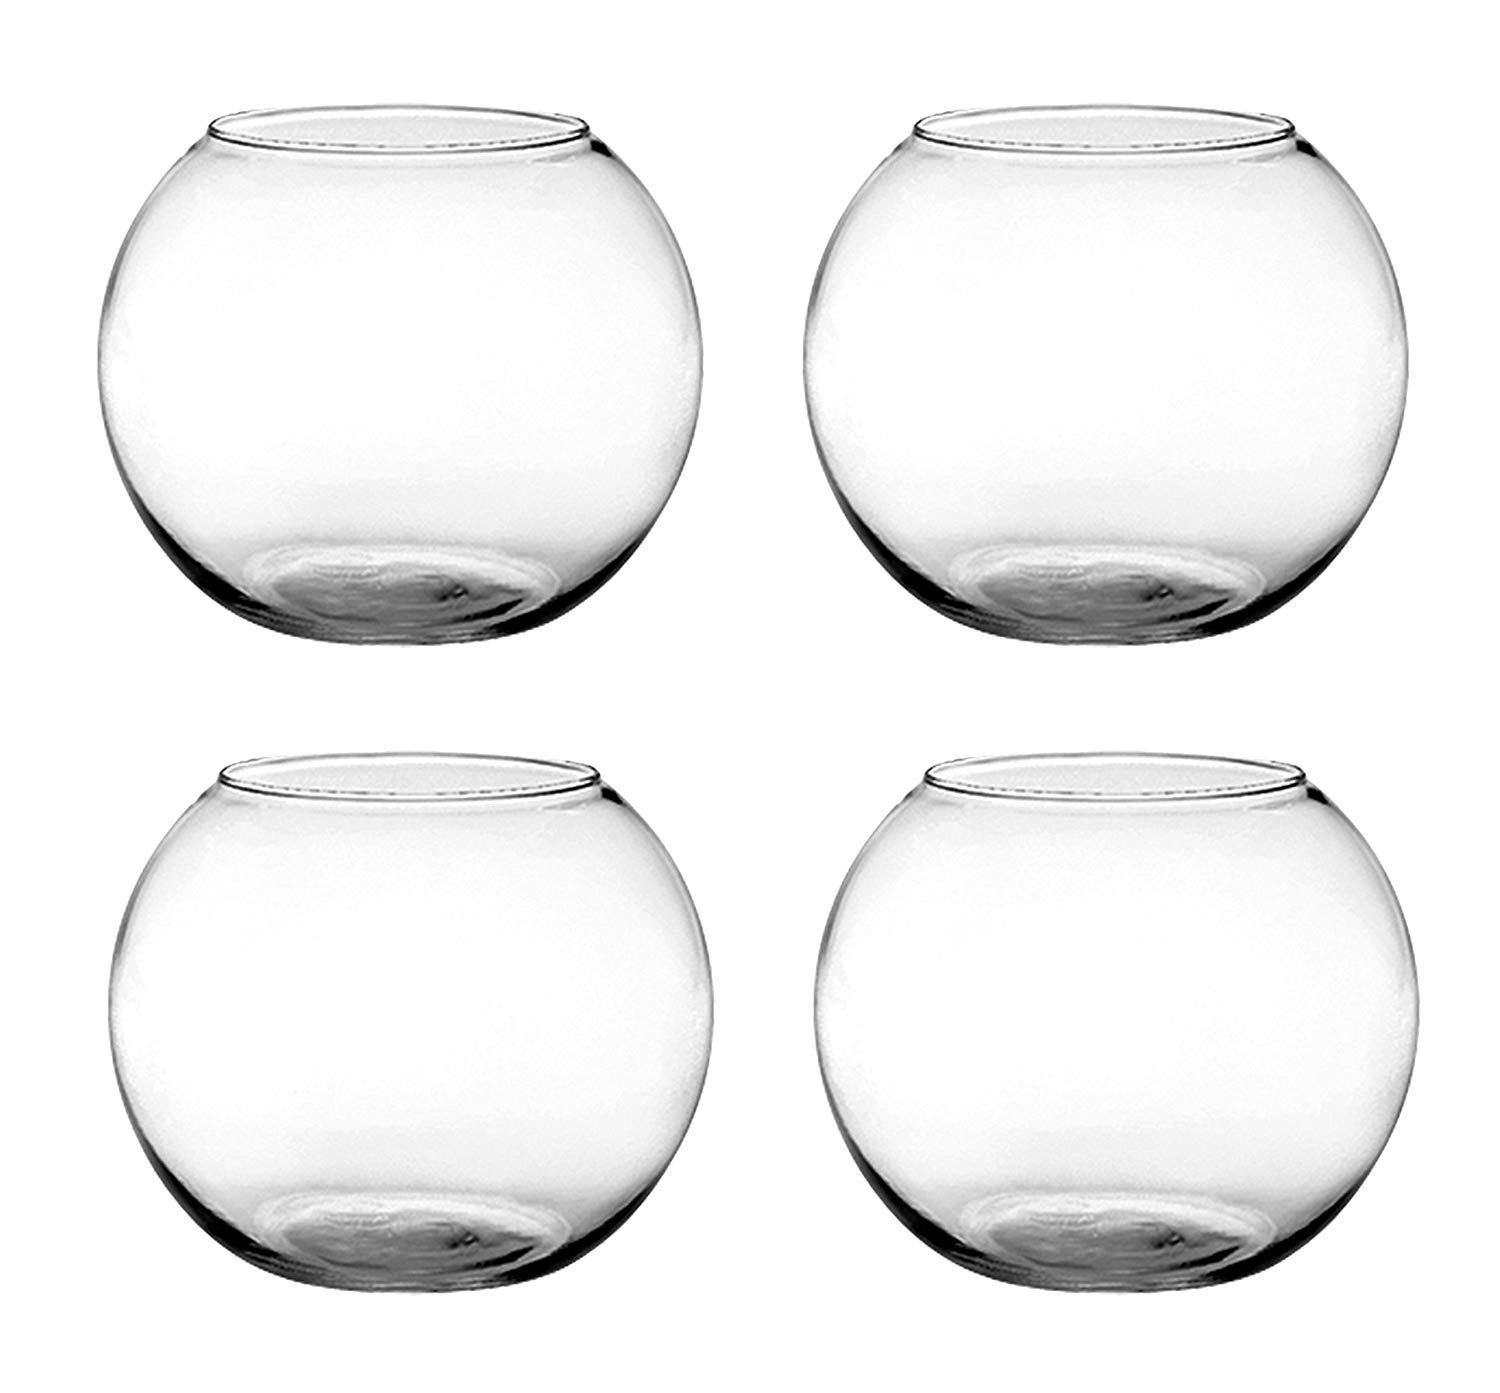 18 Famous 20 Inch Plastic Cylinder Vases 2024 free download 20 inch plastic cylinder vases of amazon com set of 4 syndicate sales 6 inches clear rose bowl throughout amazon com set of 4 syndicate sales 6 inches clear rose bowl bundled by maven gifts 